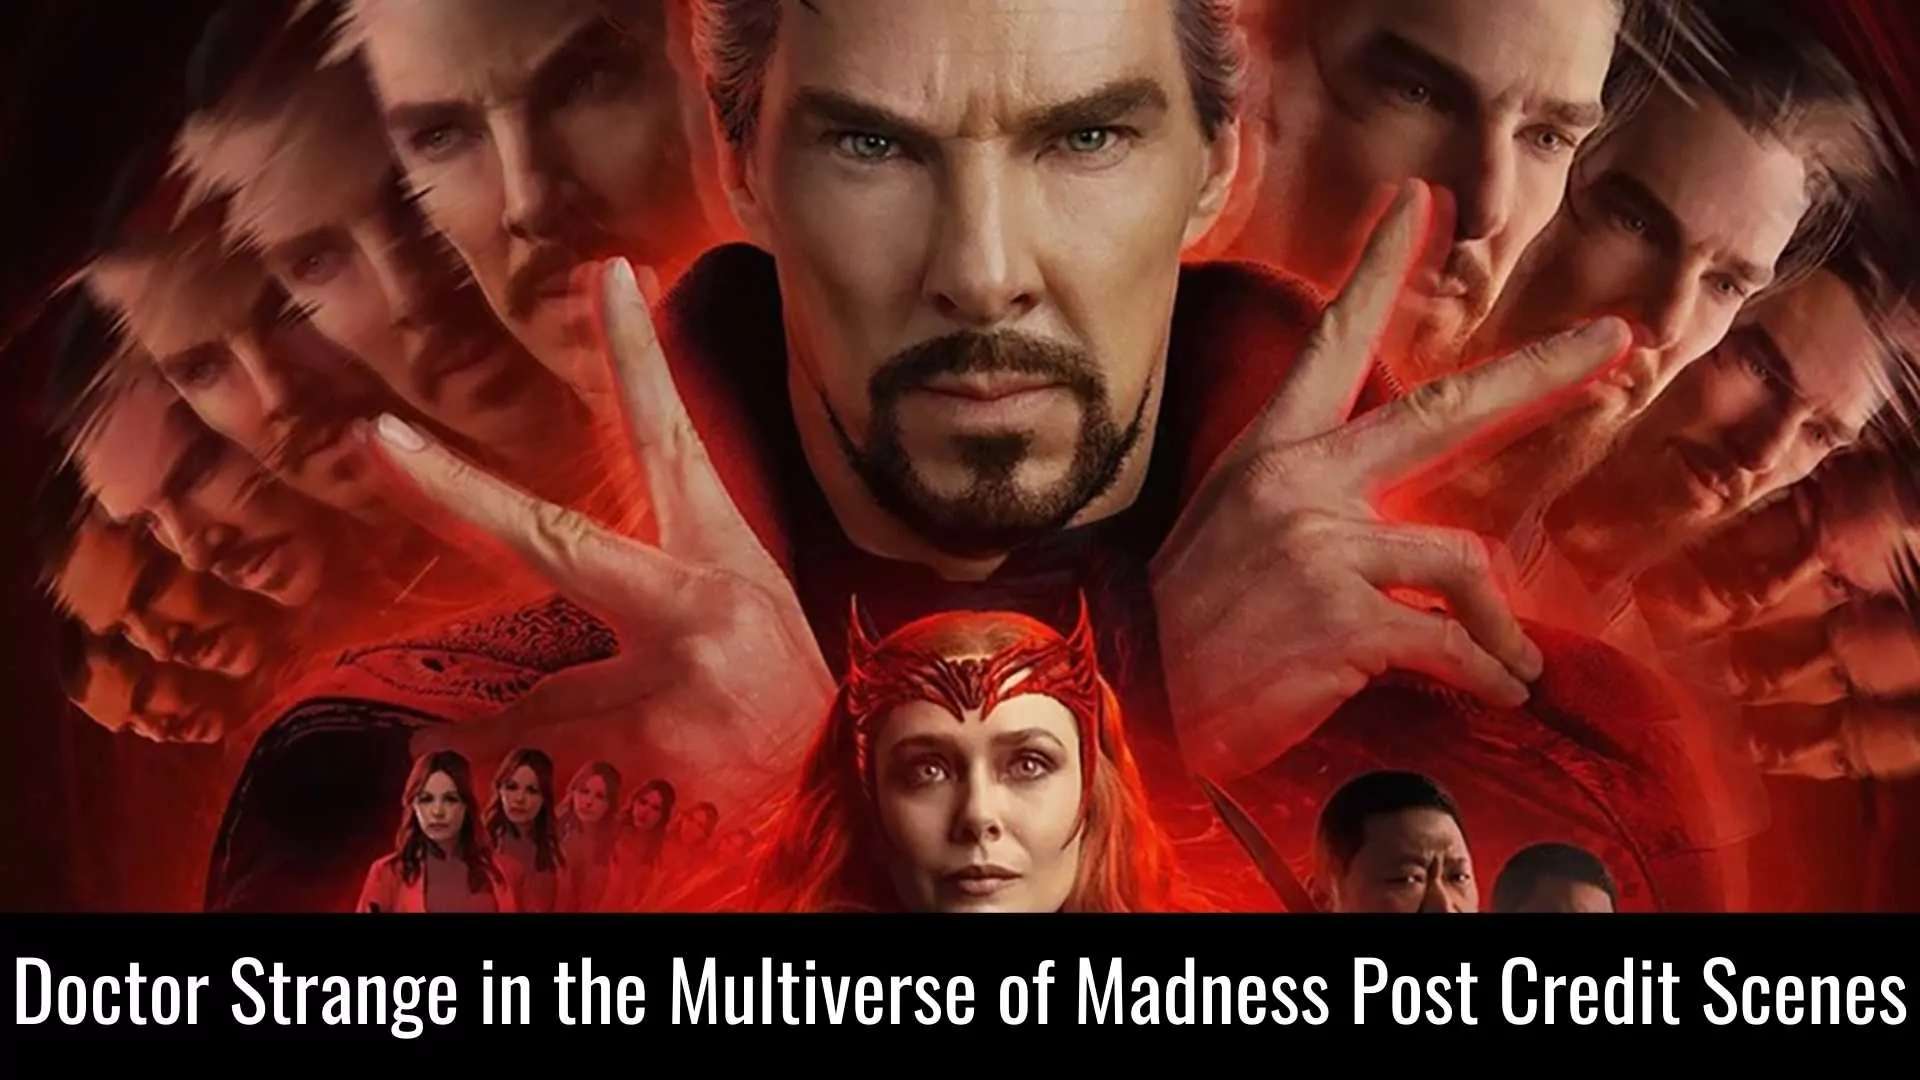 Doctor Strange in the Multiverse of Madness Post Credit Scenes, end credit scenes of the film. mid credit scenes of Doctor Strange in the Multiverse of Madness